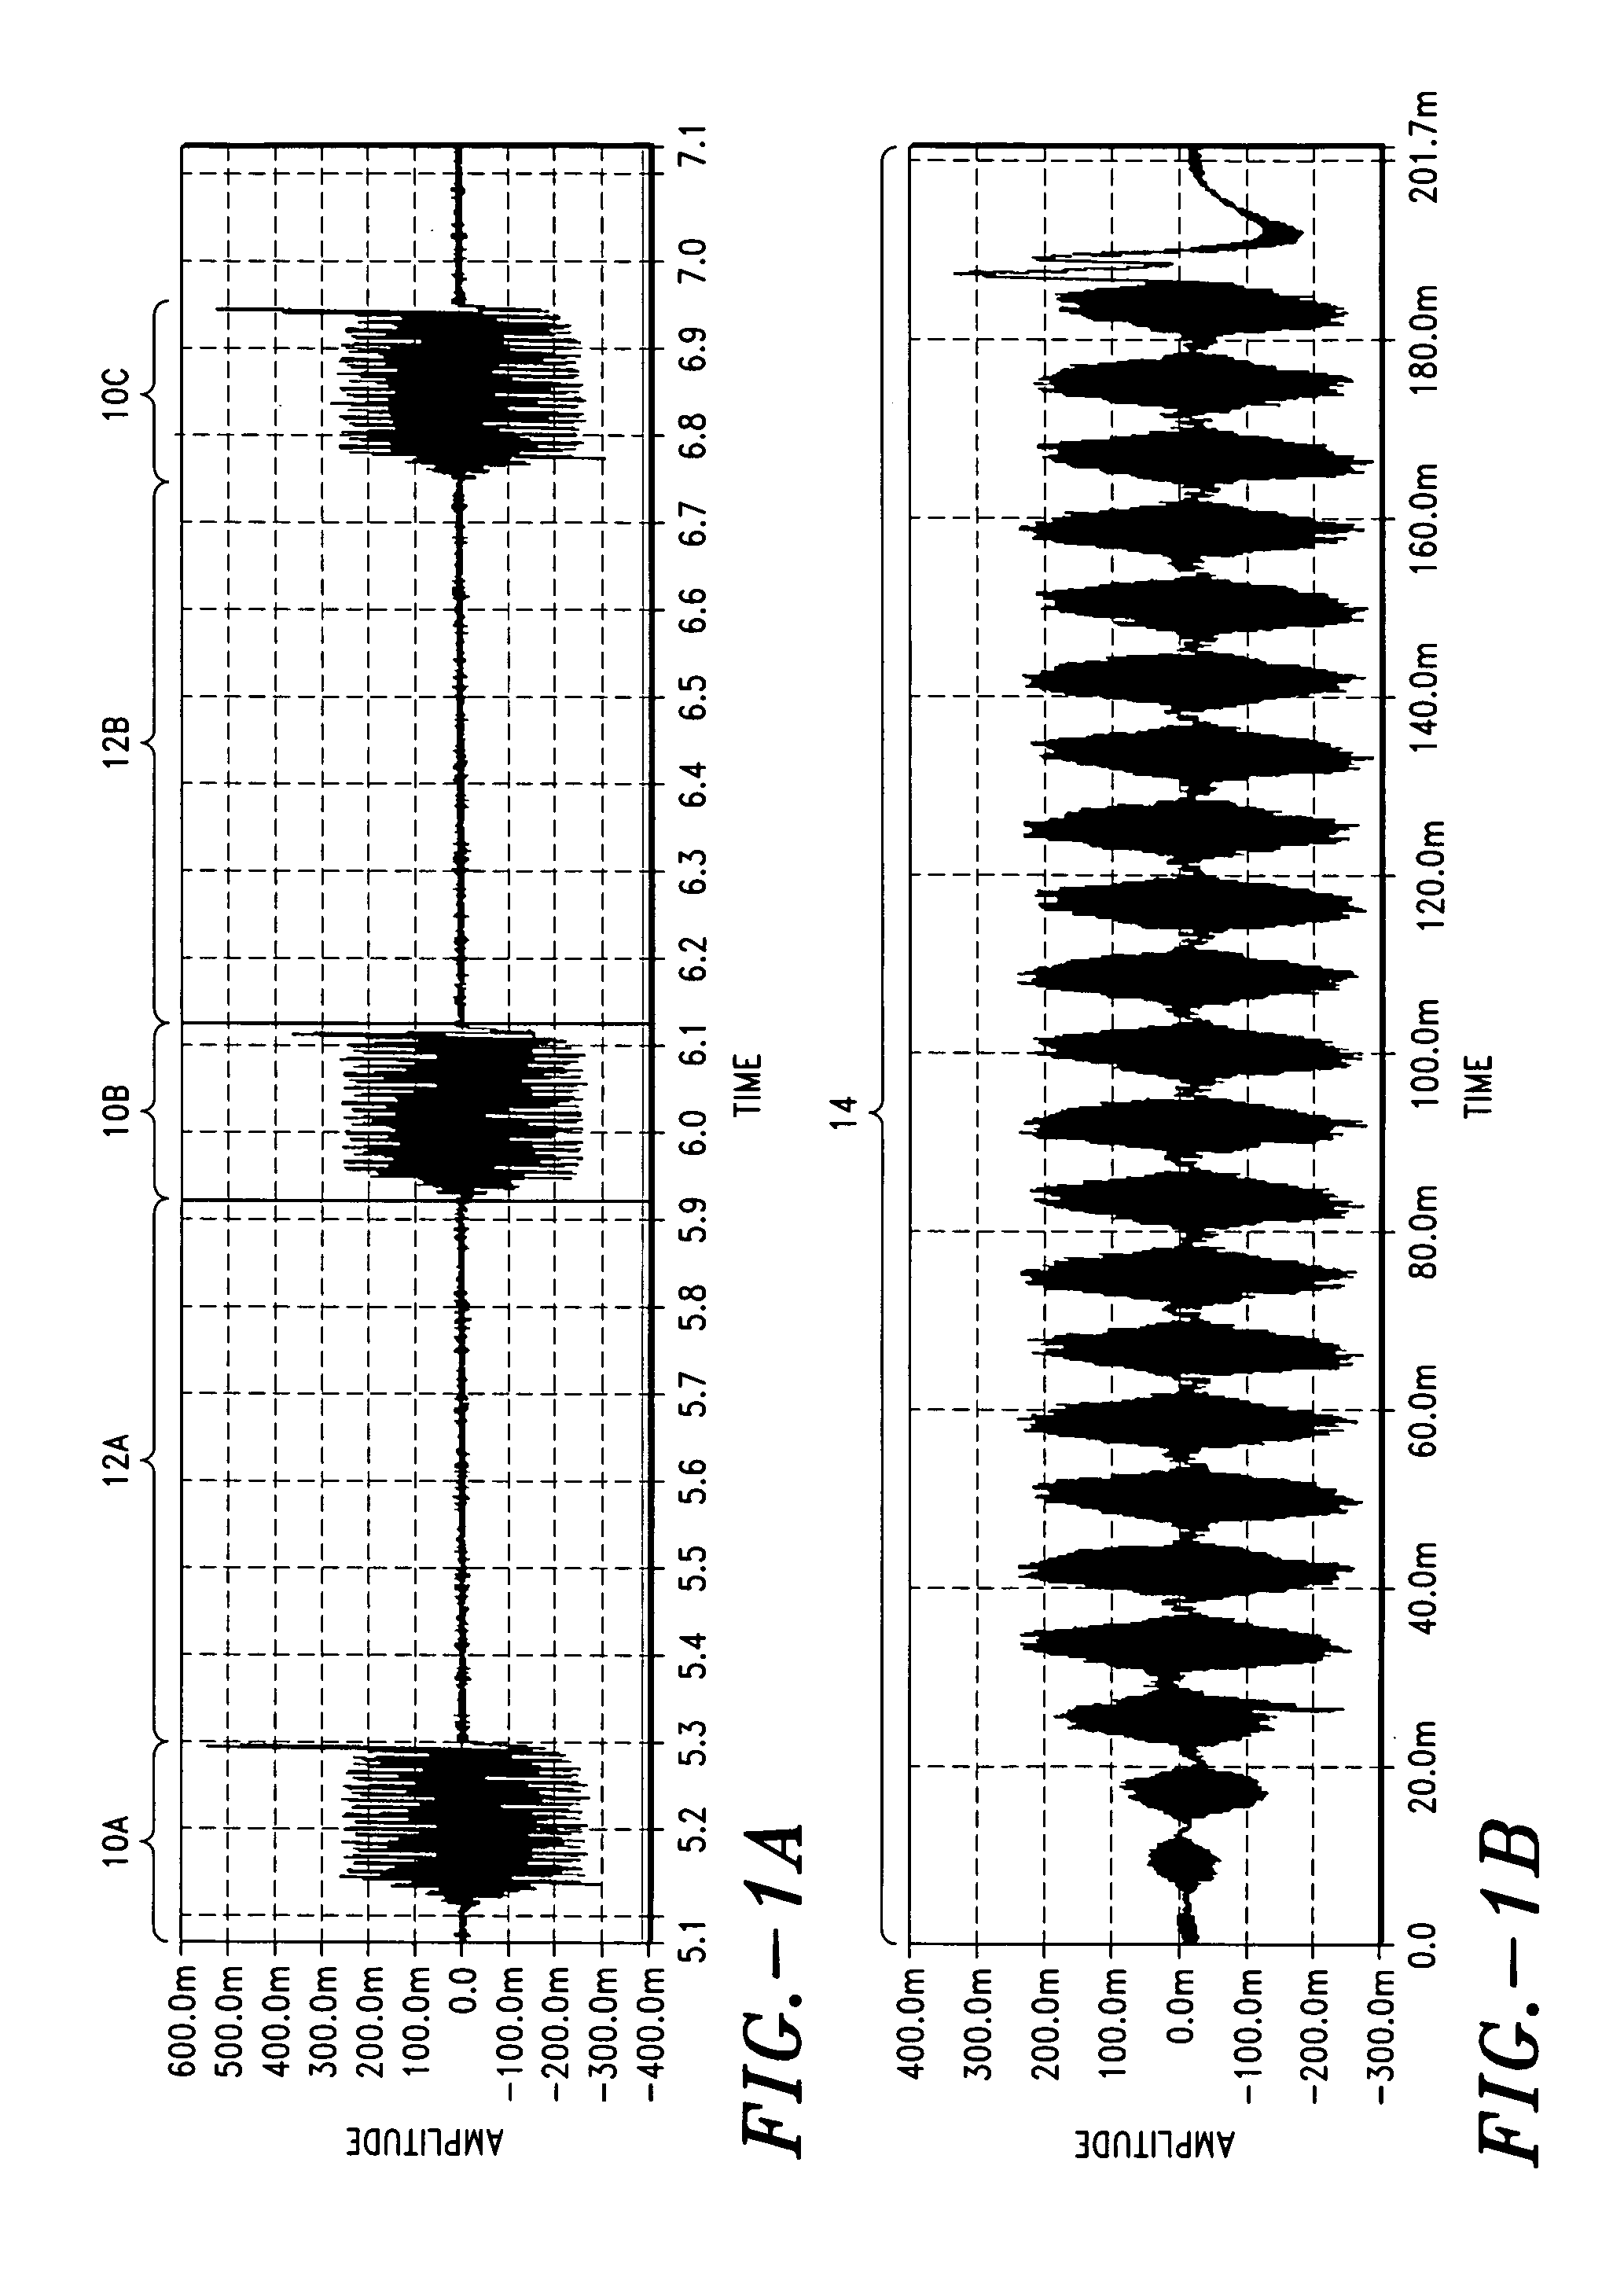 Method and system to control respiration by means of simulated neuro-electrical coded signals